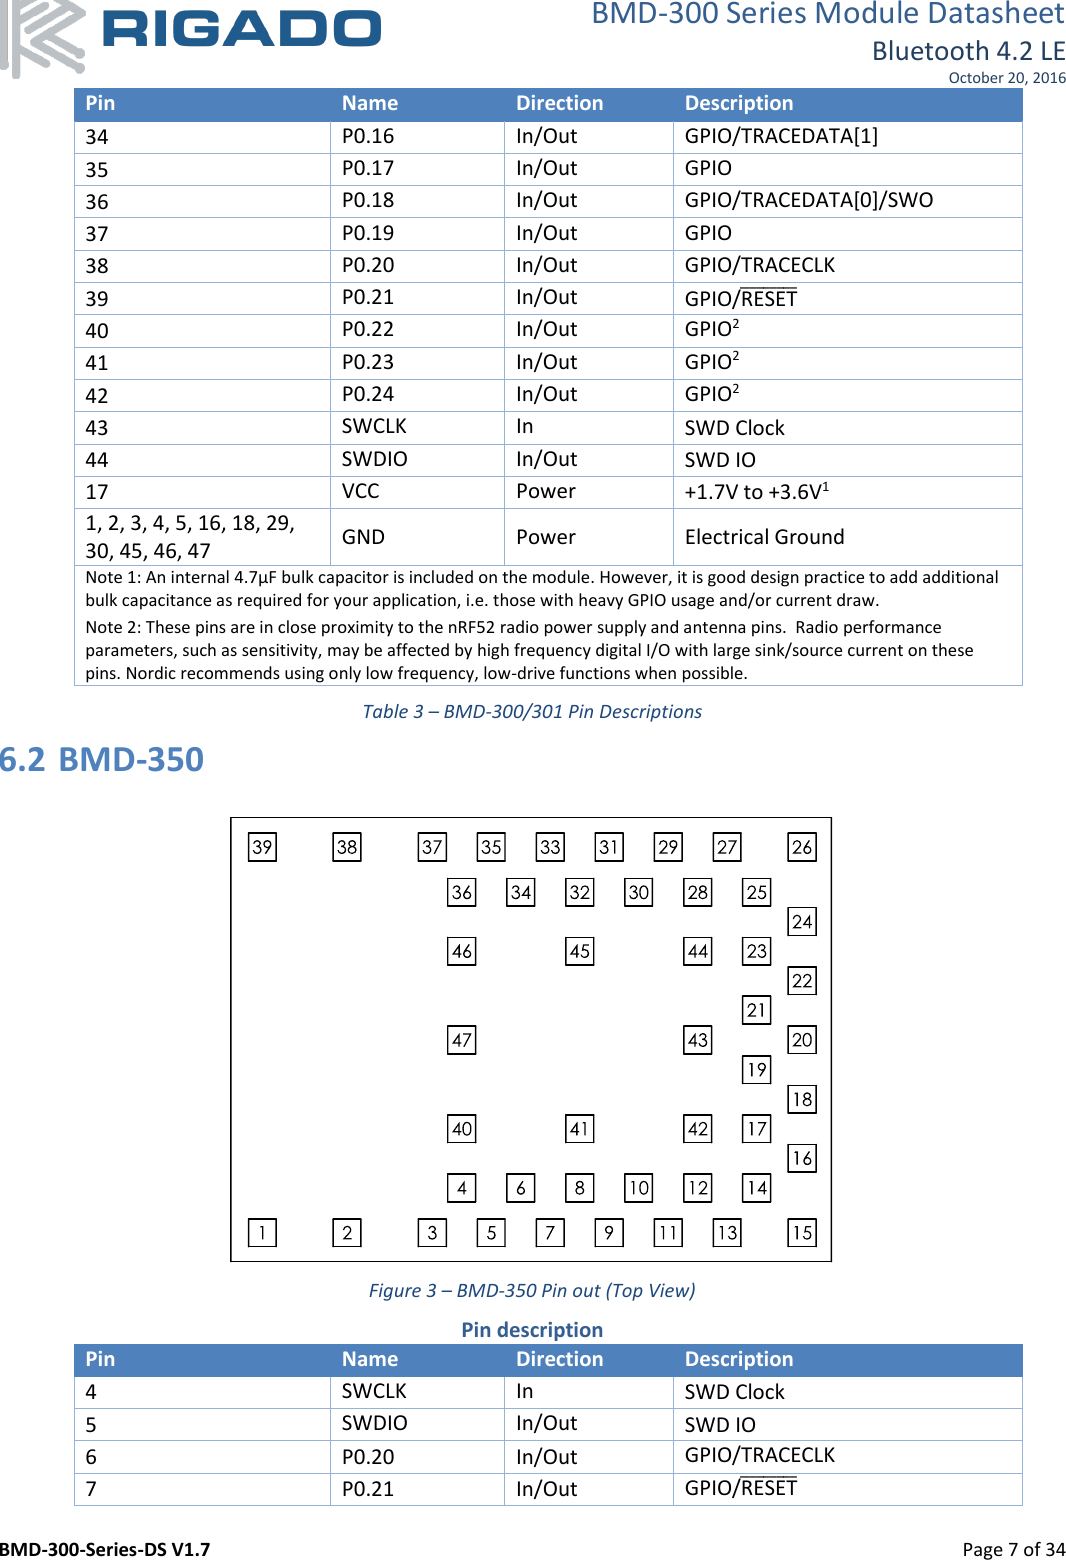 BMD-300 Series Module Datasheet Bluetooth 4.2 LE October 20, 2016 BMD-300-Series-DS V1.7         Page 7 of 34 Pin Name Direction Description 34 P0.16 In/Out GPIO/TRACEDATA[1] 35 P0.17 In/Out GPIO 36 P0.18 In/Out GPIO/TRACEDATA[0]/SWO 37 P0.19 In/Out GPIO 38 P0.20 In/Out GPIO/TRACECLK 39 P0.21 In/Out GPIO/RESET̅̅̅̅̅̅̅̅ 40 P0.22 In/Out GPIO2 41 P0.23 In/Out GPIO2 42 P0.24 In/Out GPIO2 43 SWCLK In SWD Clock 44 SWDIO In/Out SWD IO 17 VCC Power +1.7V to +3.6V1 1, 2, 3, 4, 5, 16, 18, 29, 30, 45, 46, 47 GND Power Electrical Ground Note 1: An internal 4.7µF bulk capacitor is included on the module. However, it is good design practice to add additional bulk capacitance as required for your application, i.e. those with heavy GPIO usage and/or current draw. Note 2: These pins are in close proximity to the nRF52 radio power supply and antenna pins.  Radio performance parameters, such as sensitivity, may be affected by high frequency digital I/O with large sink/source current on these pins. Nordic recommends using only low frequency, low-drive functions when possible. Table 3 – BMD-300/301 Pin Descriptions 6.2 BMD-350   Figure 3 – BMD-350 Pin out (Top View) Pin description Pin Name Direction Description 4 SWCLK In SWD Clock 5 SWDIO In/Out SWD IO 6 P0.20 In/Out GPIO/TRACECLK 7 P0.21 In/Out GPIO/RESET̅̅̅̅̅̅̅̅ 